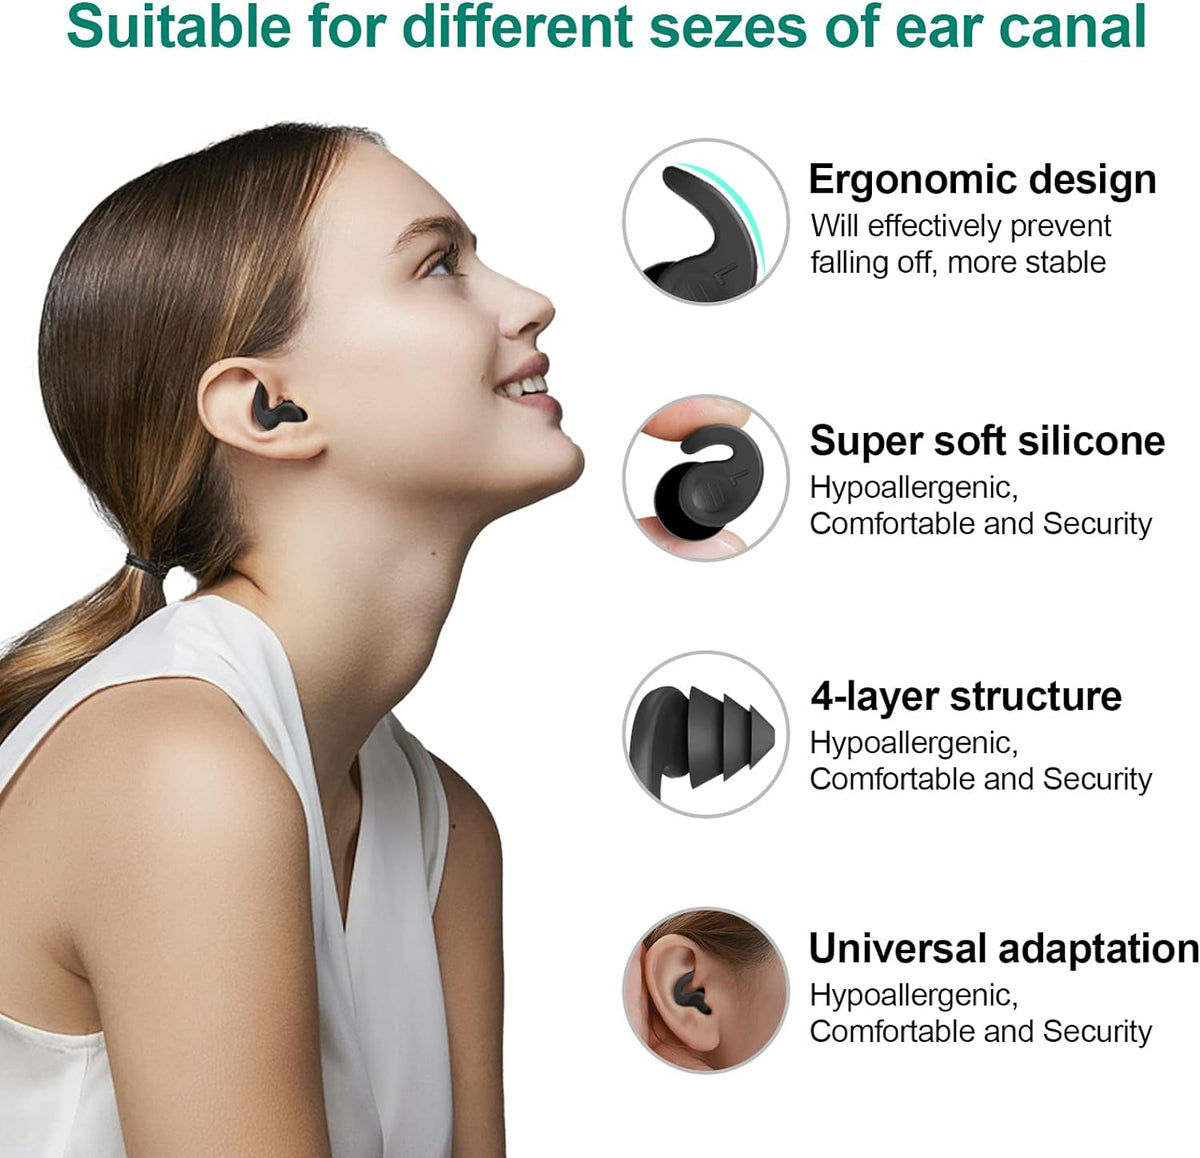 Swimming Ear Plugs, 3 Pairs Great Waterproof Ultra Comfy Earplugs, Reusable Silicone Ear Plugs for Swimming Surfing Snorkeling and Other Water Sports (Adults & Teens 14+)